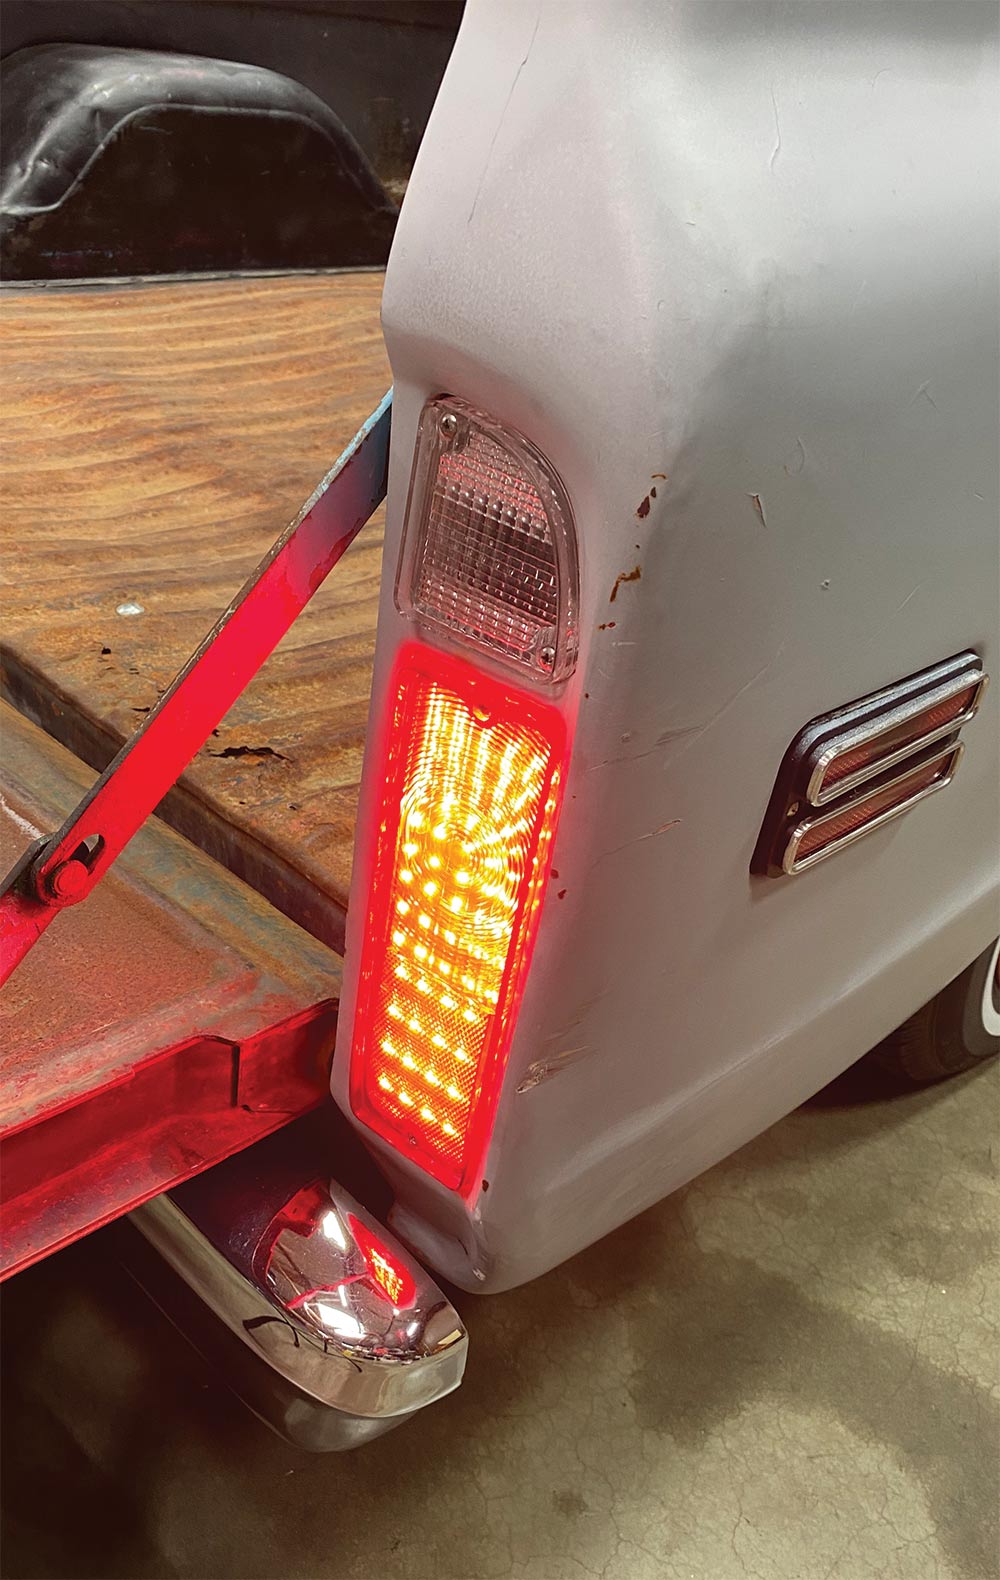 LED taillights working